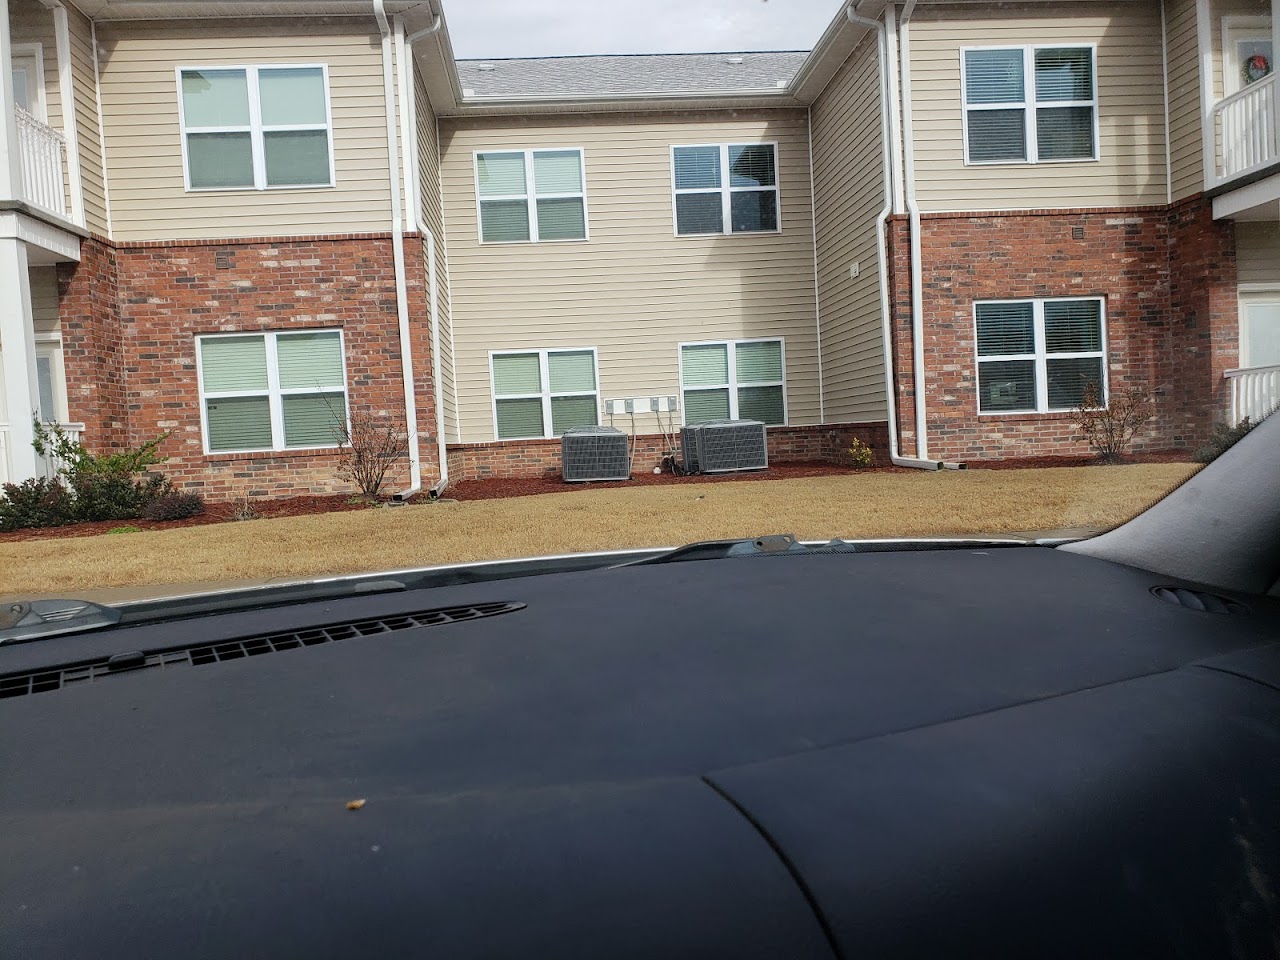 Photo of MILLWOOD PLACE. Affordable housing located at 300 MILLWOOD ROAD CLARKSVILLE, AR 72830